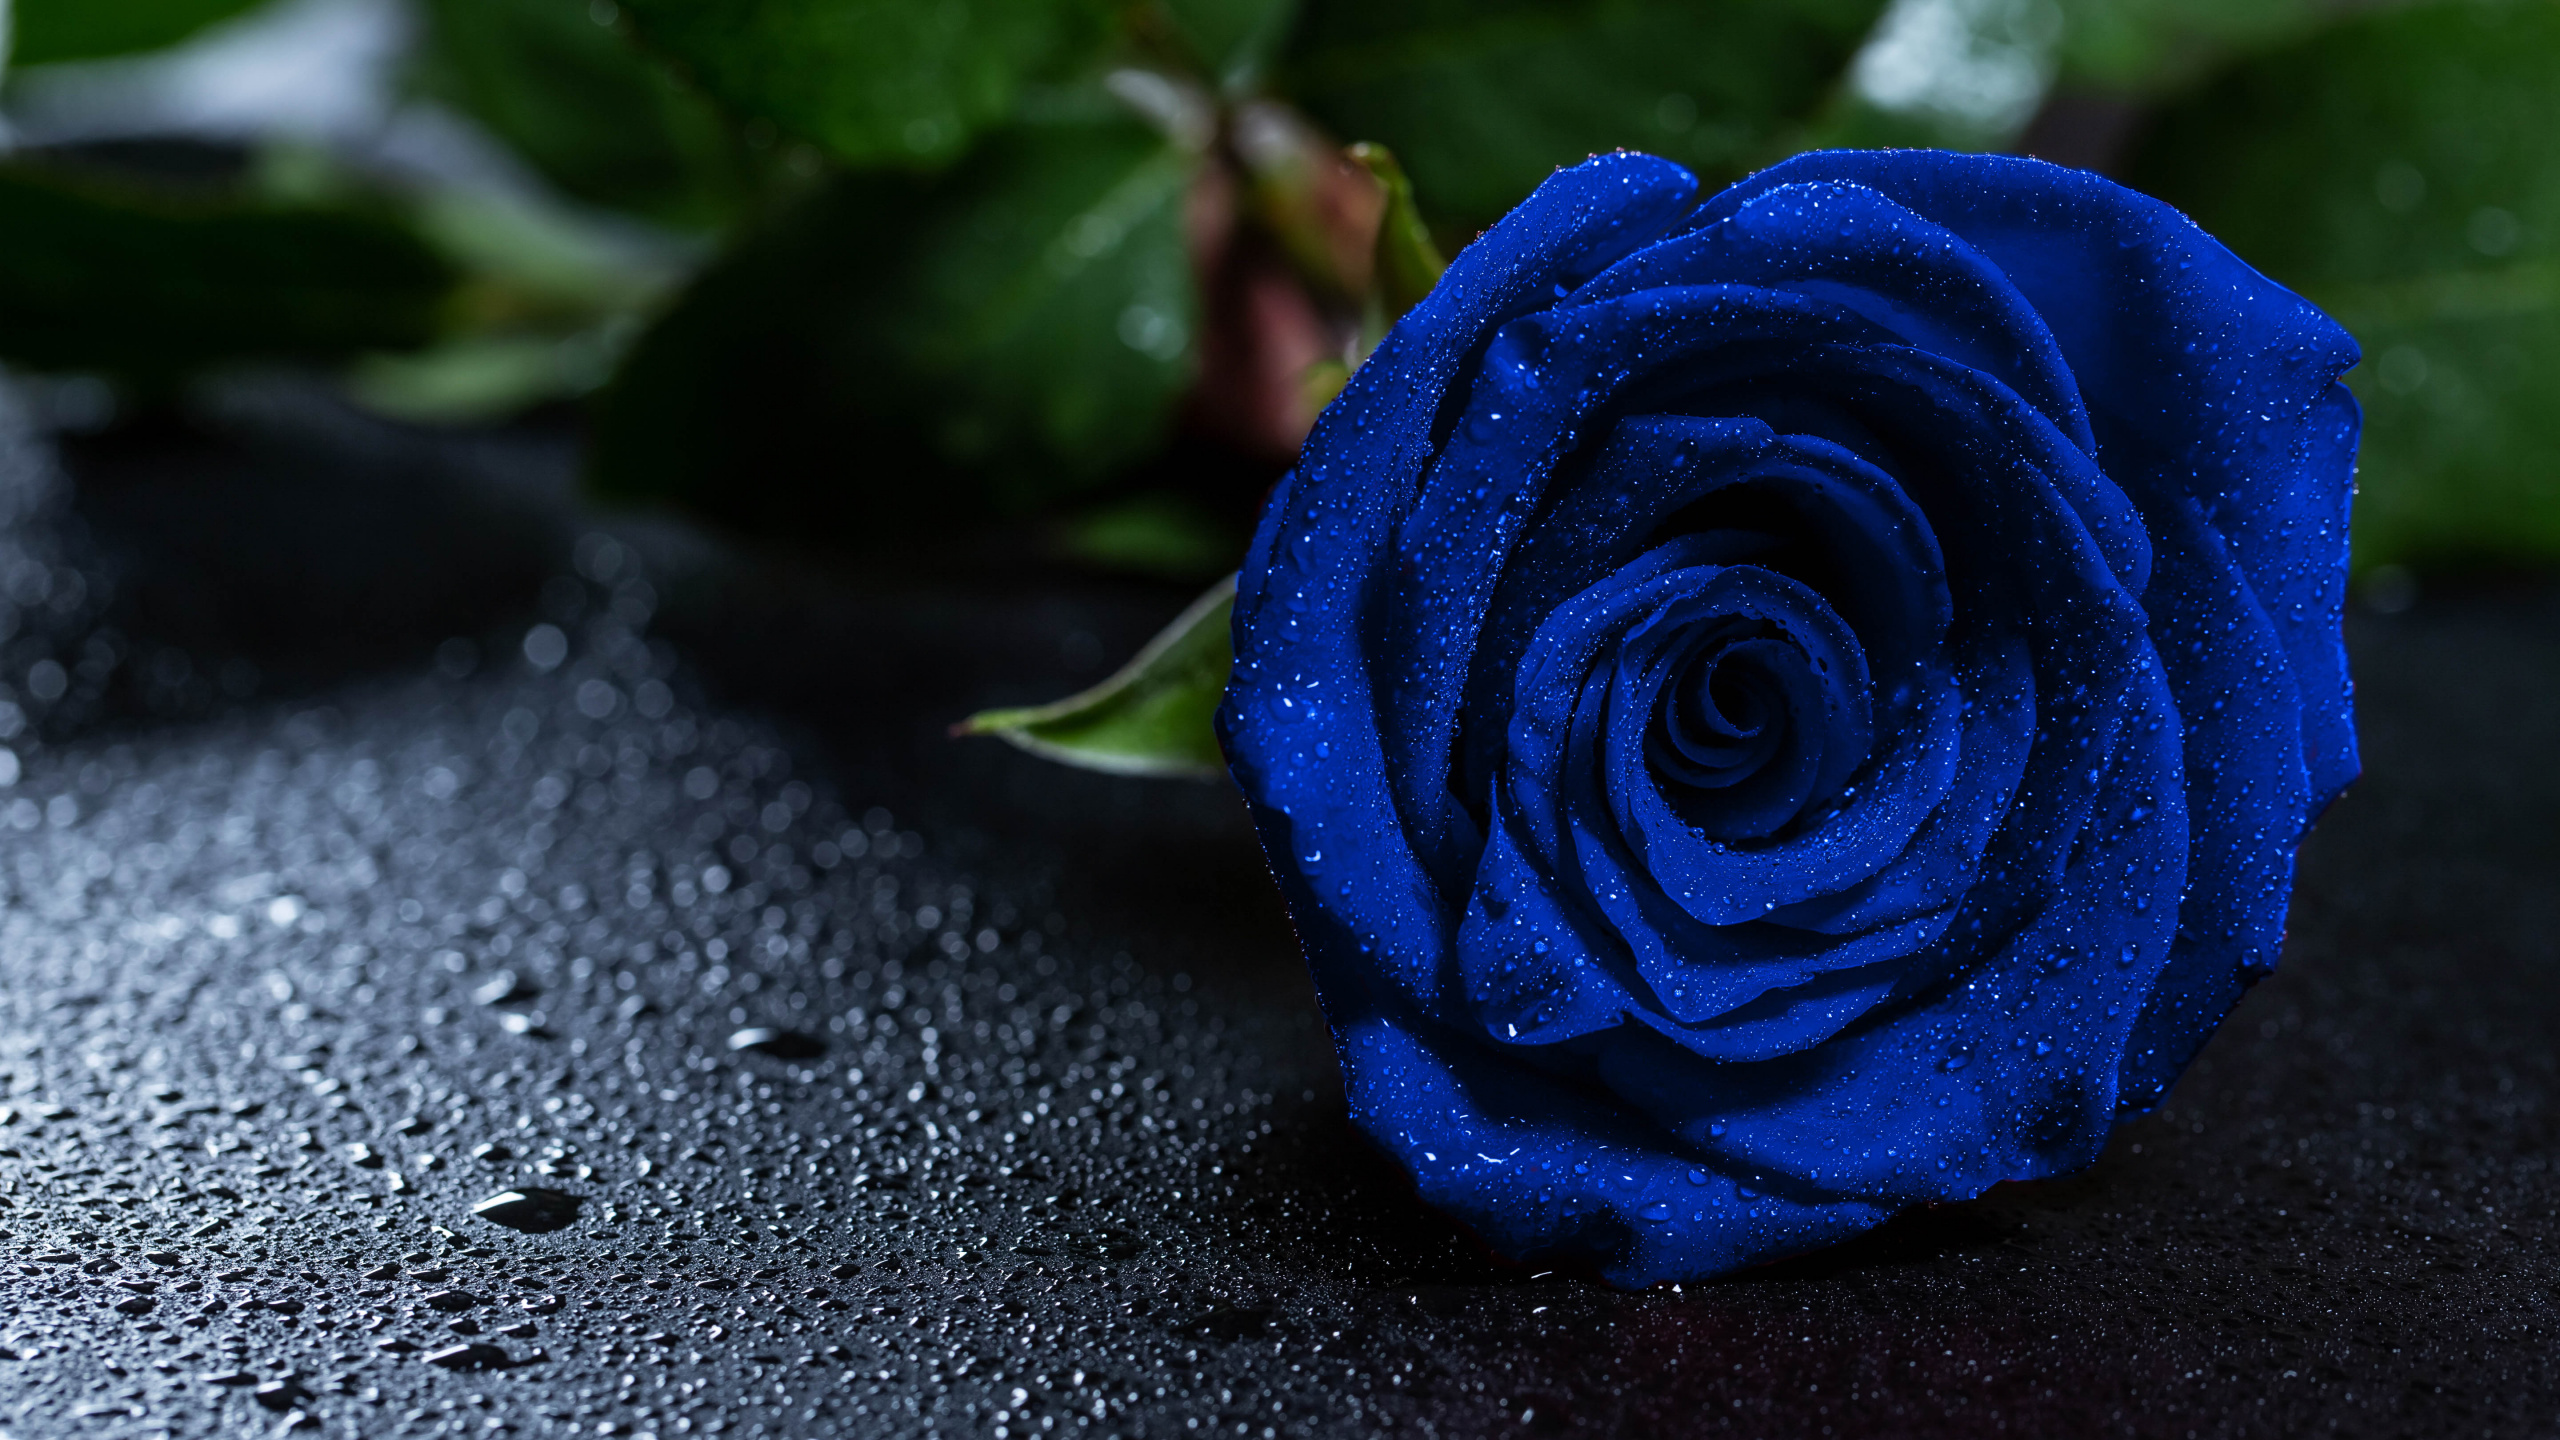 Blue Rose on Black Surface. Wallpaper in 2560x1440 Resolution